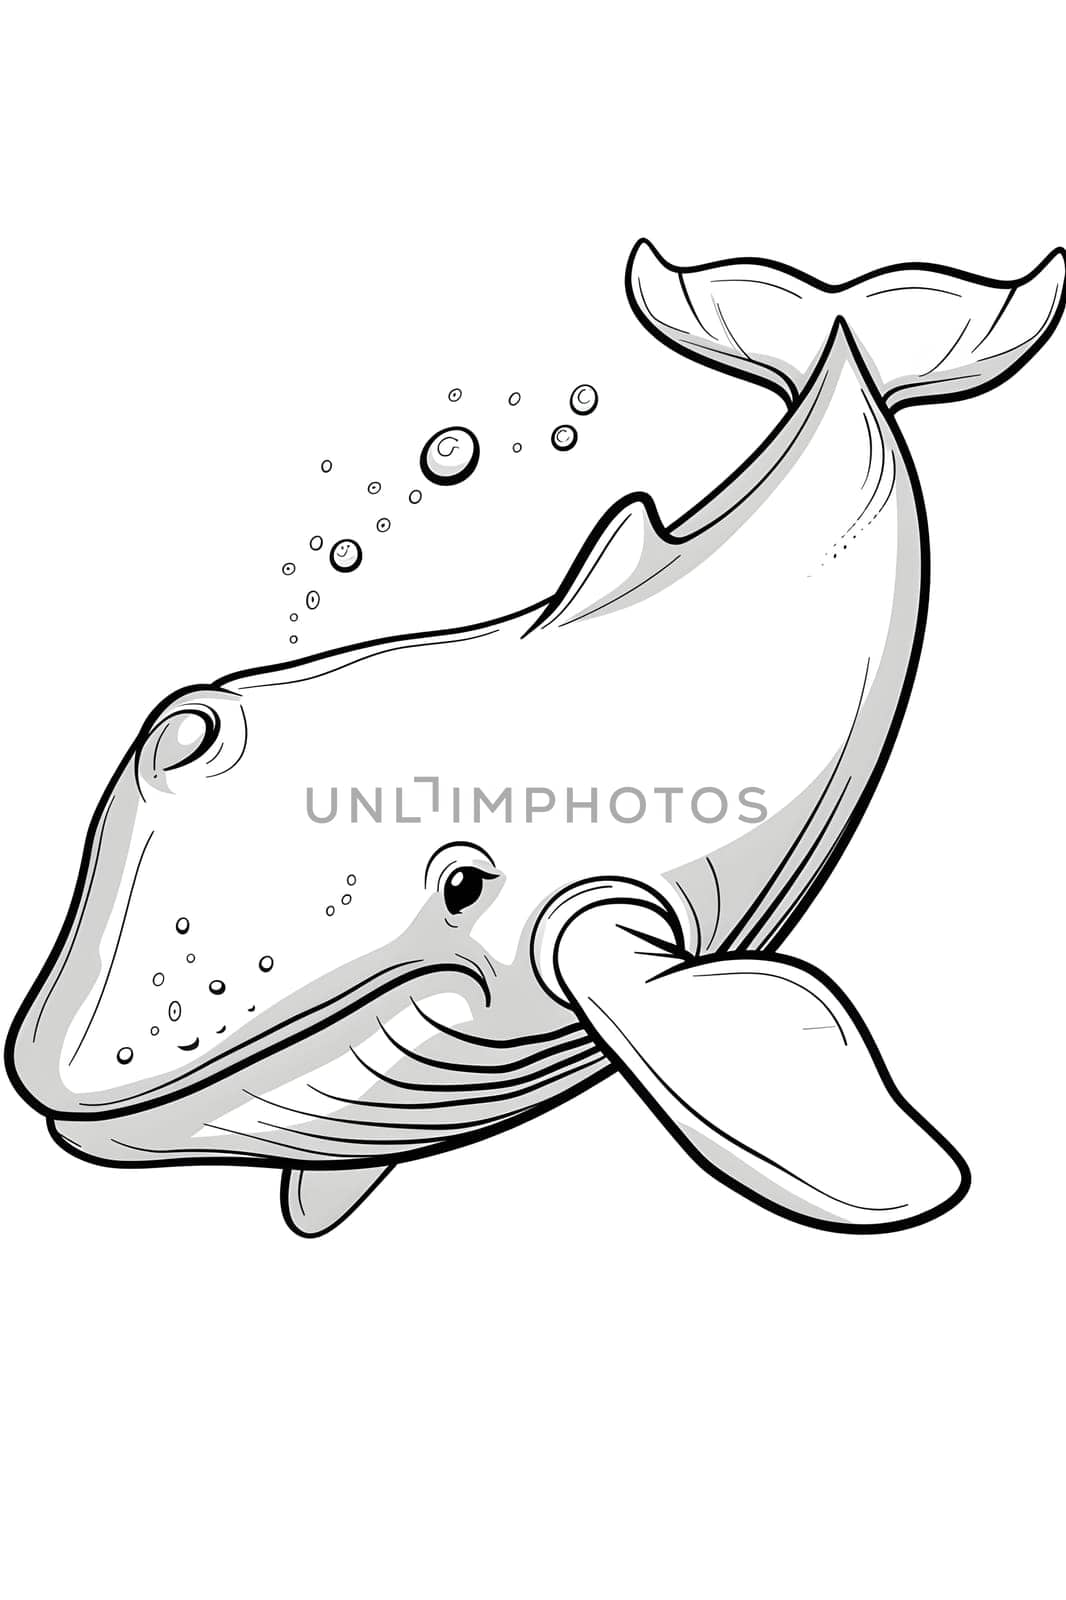 Illustration of a humpback whale with fin in black and white drawing by Nadtochiy